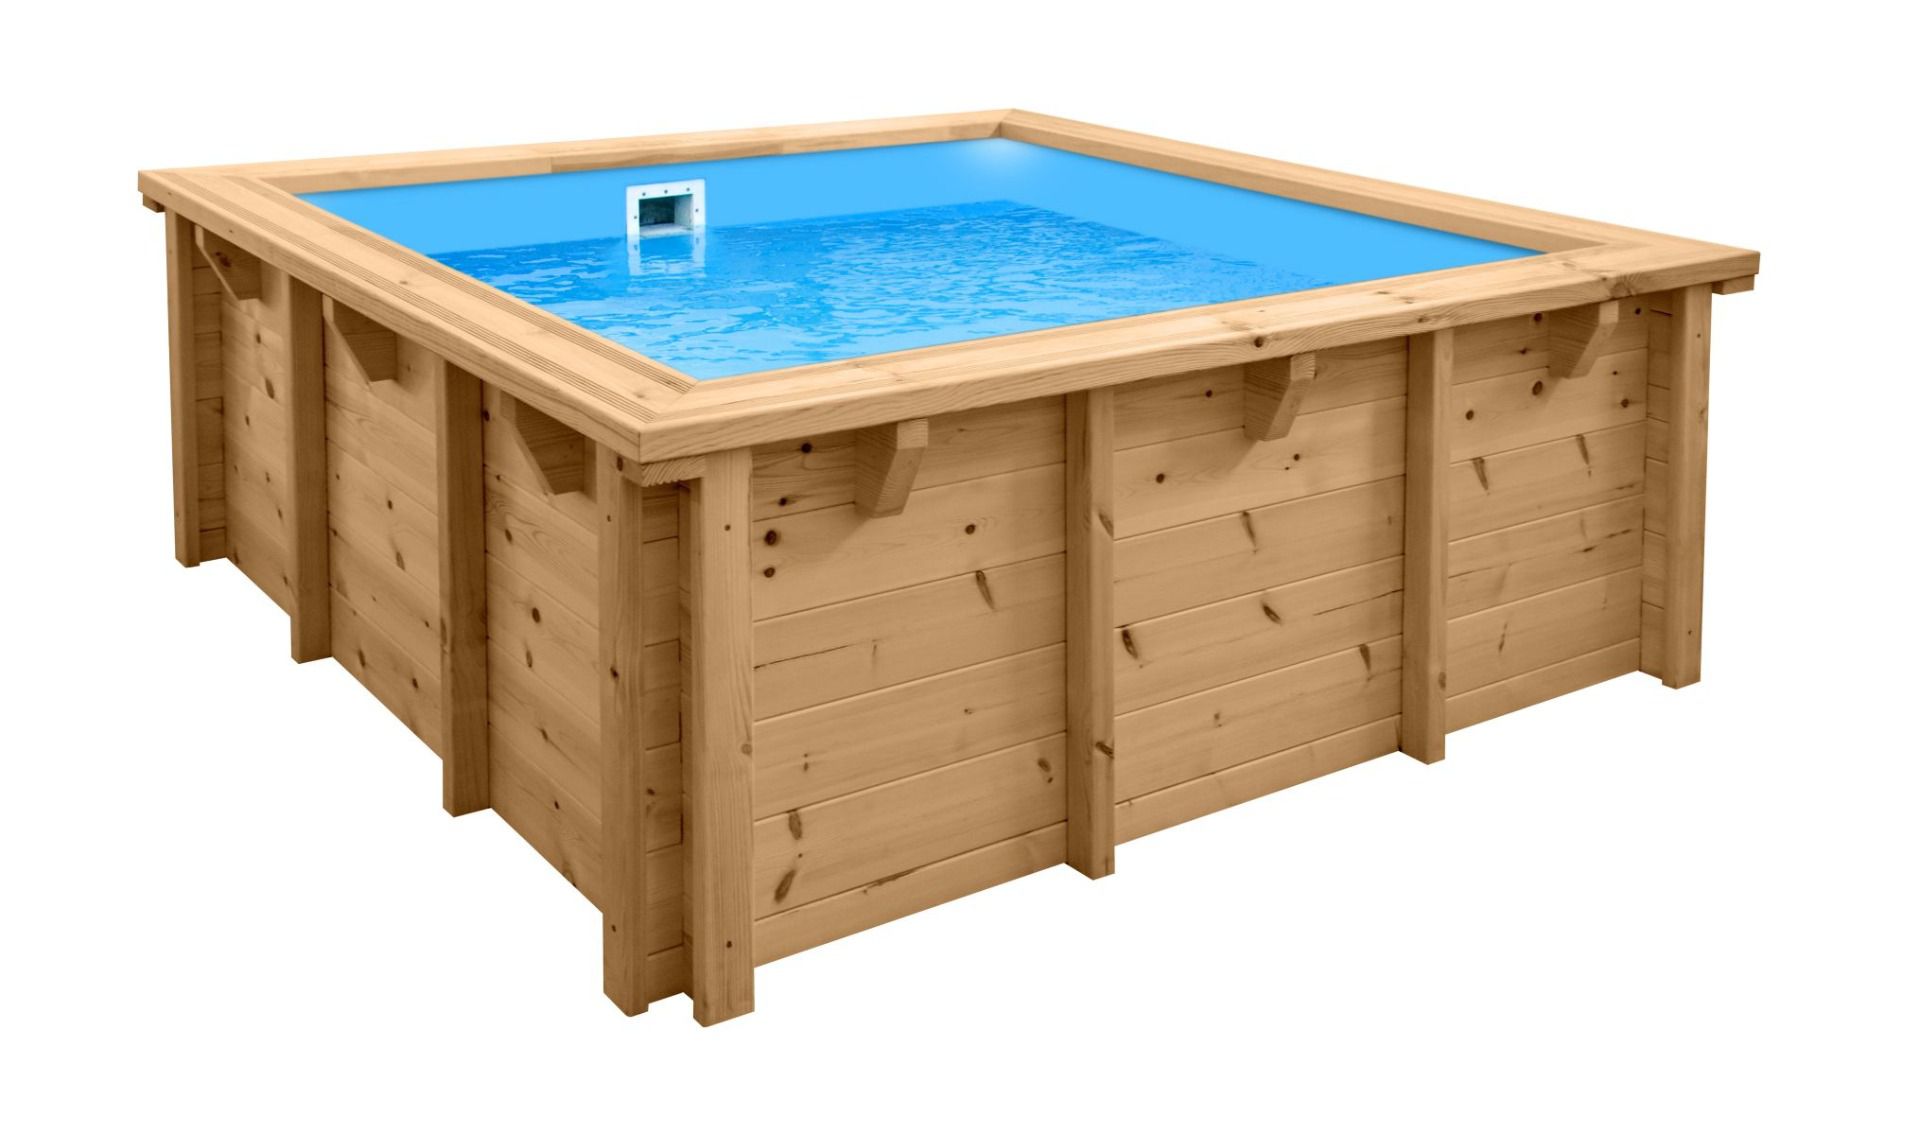 Modern Sunnydream 01 wooden pool, 2.10 x 2.10 meters, including premium filter system, filter medium, pool liner, floor and wall fleece, stainless steel corner joints